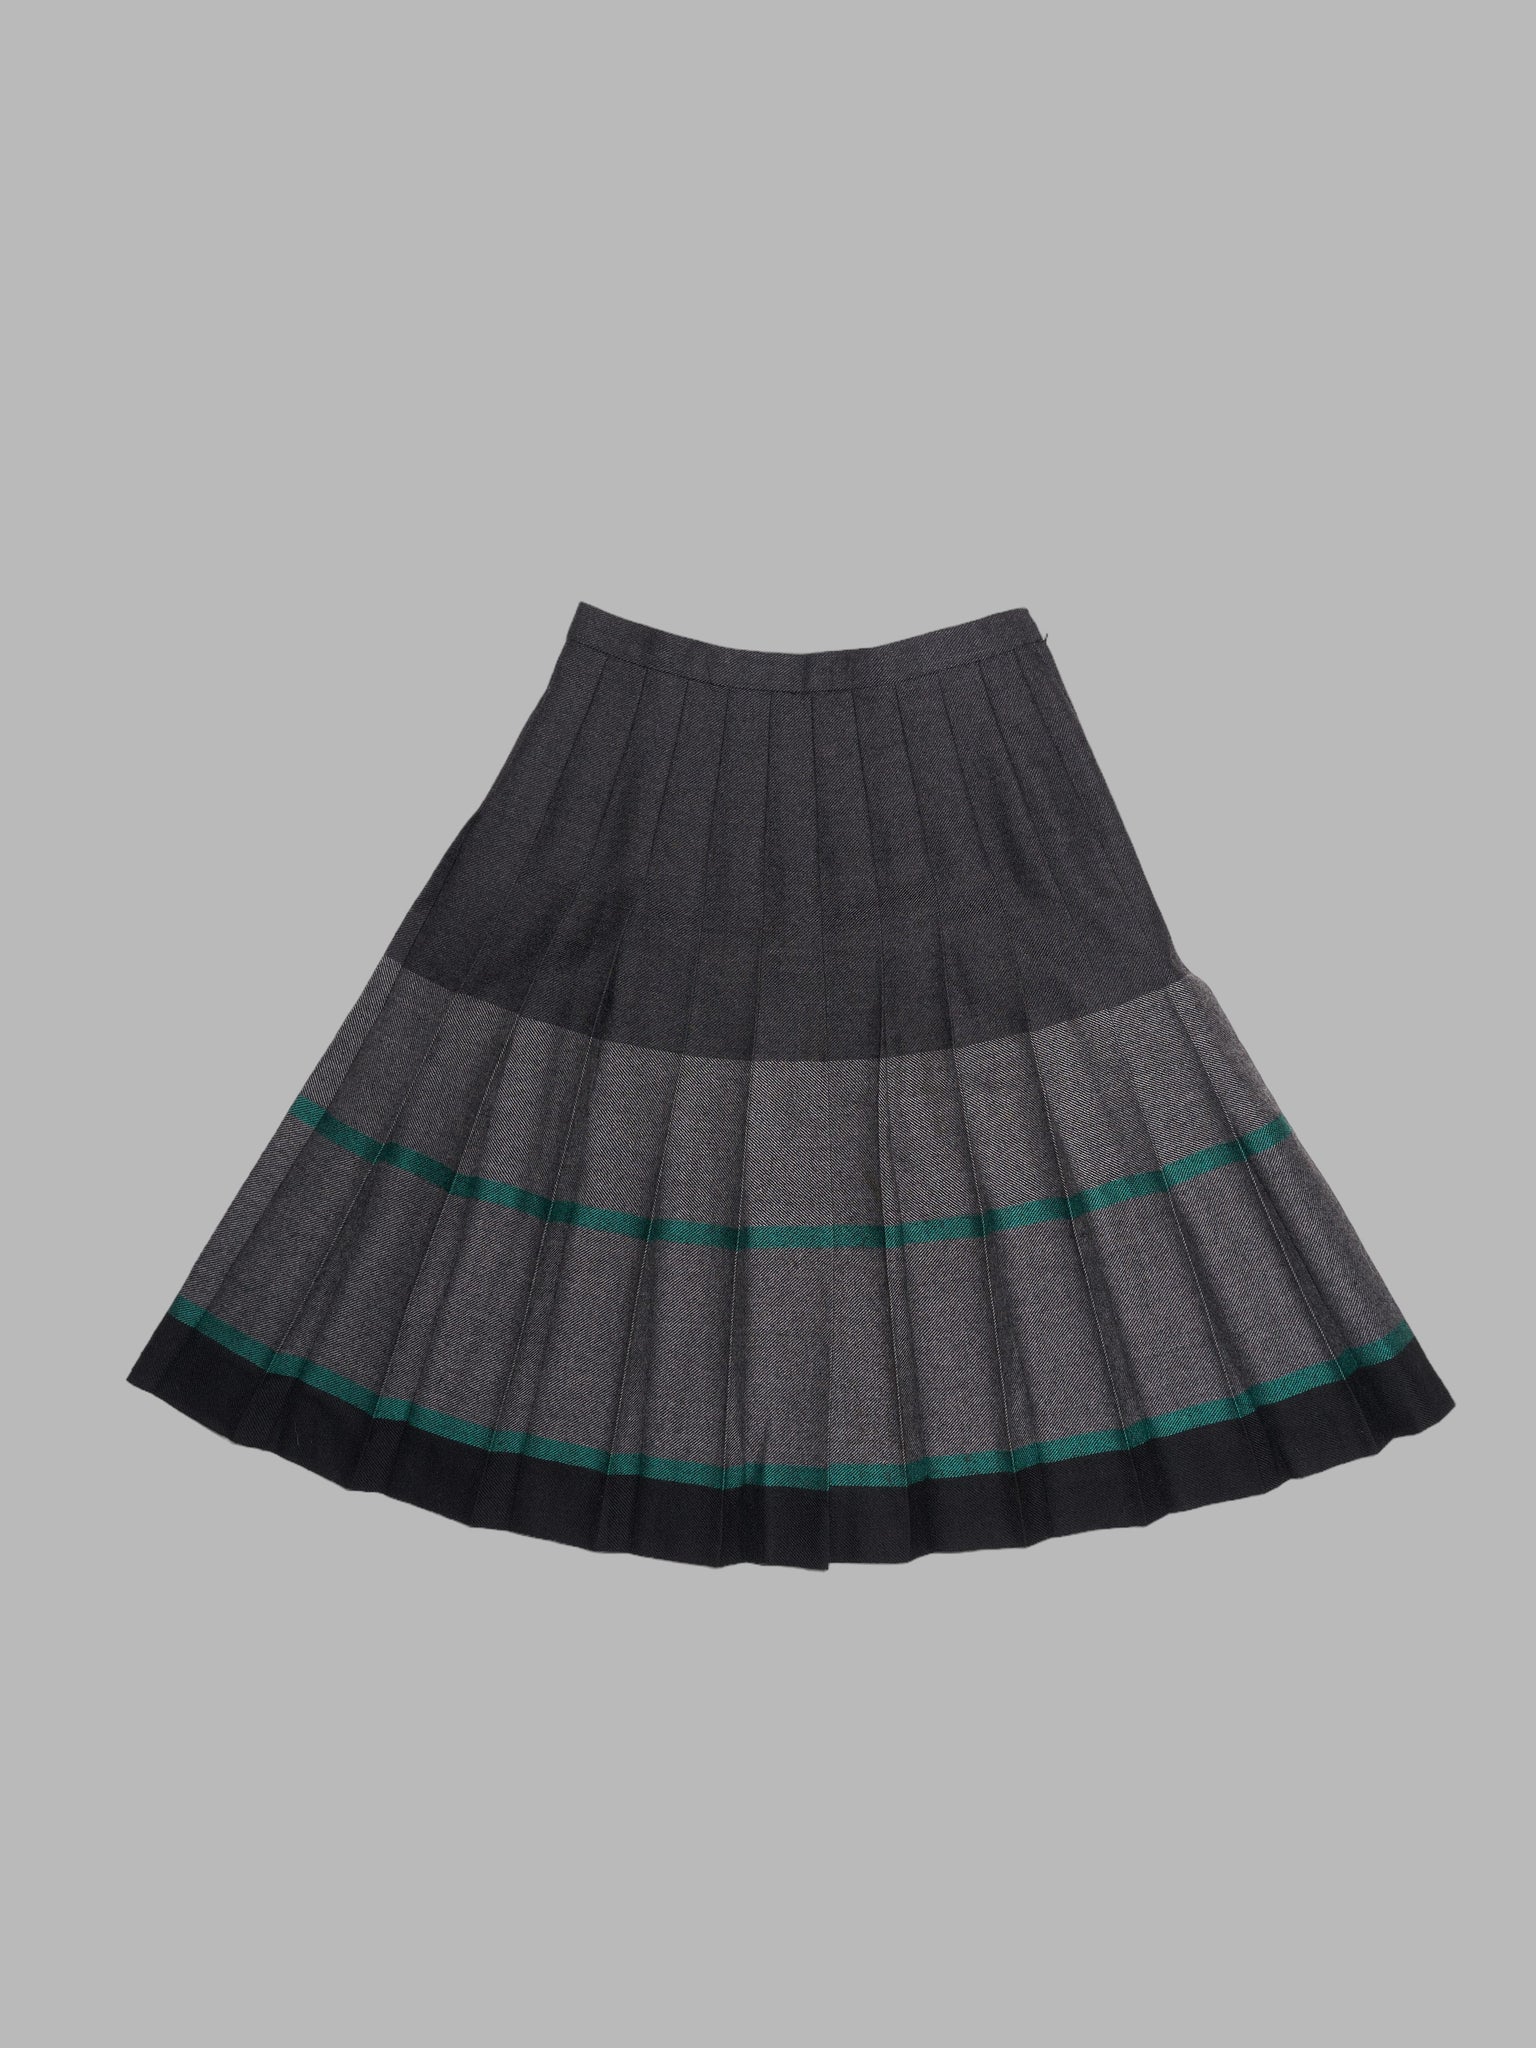 Inoue Pleats Co grey wool pleated skirt with teal accents